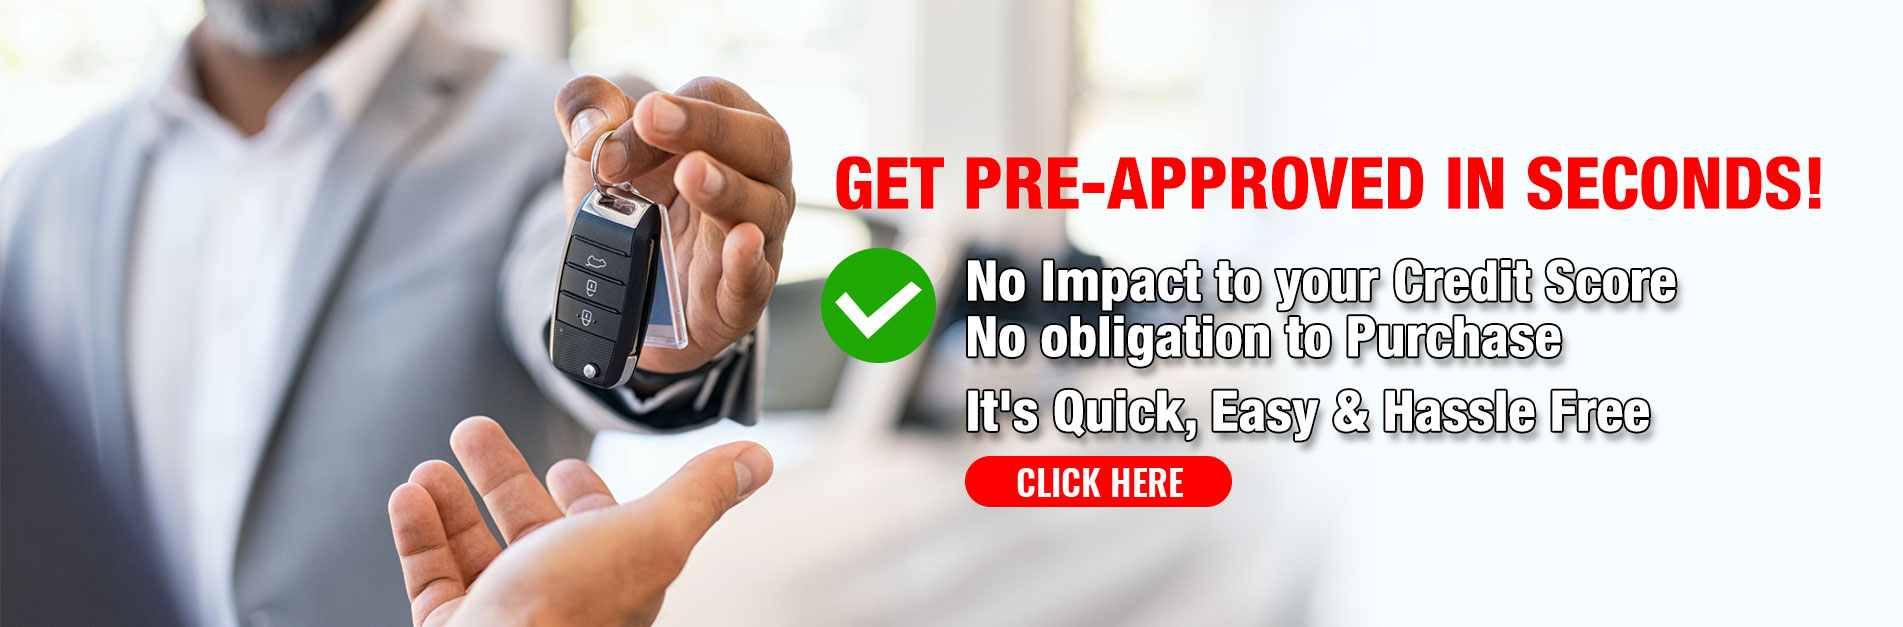 Get pre-approved in seconds